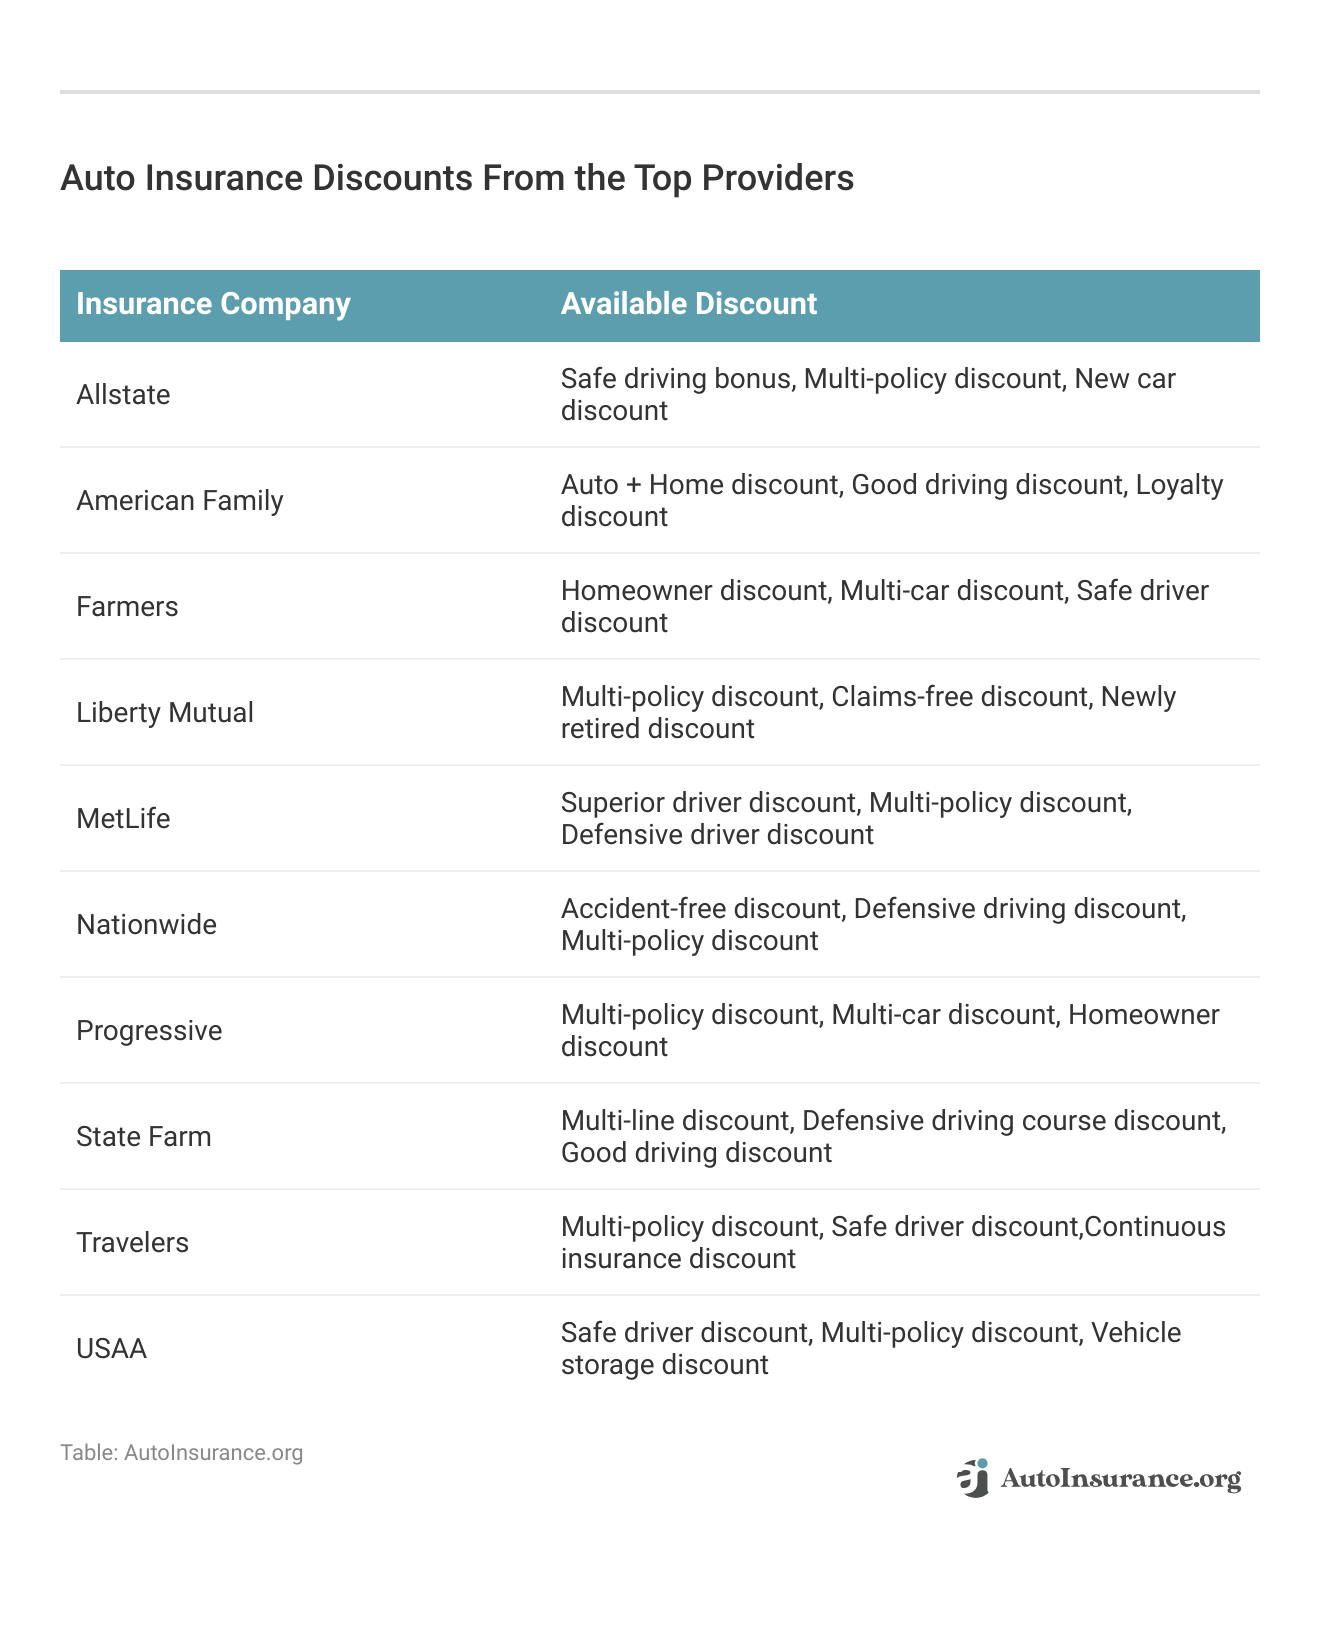 <h3>Auto Insurance Discounts From the Top Providers</h3>